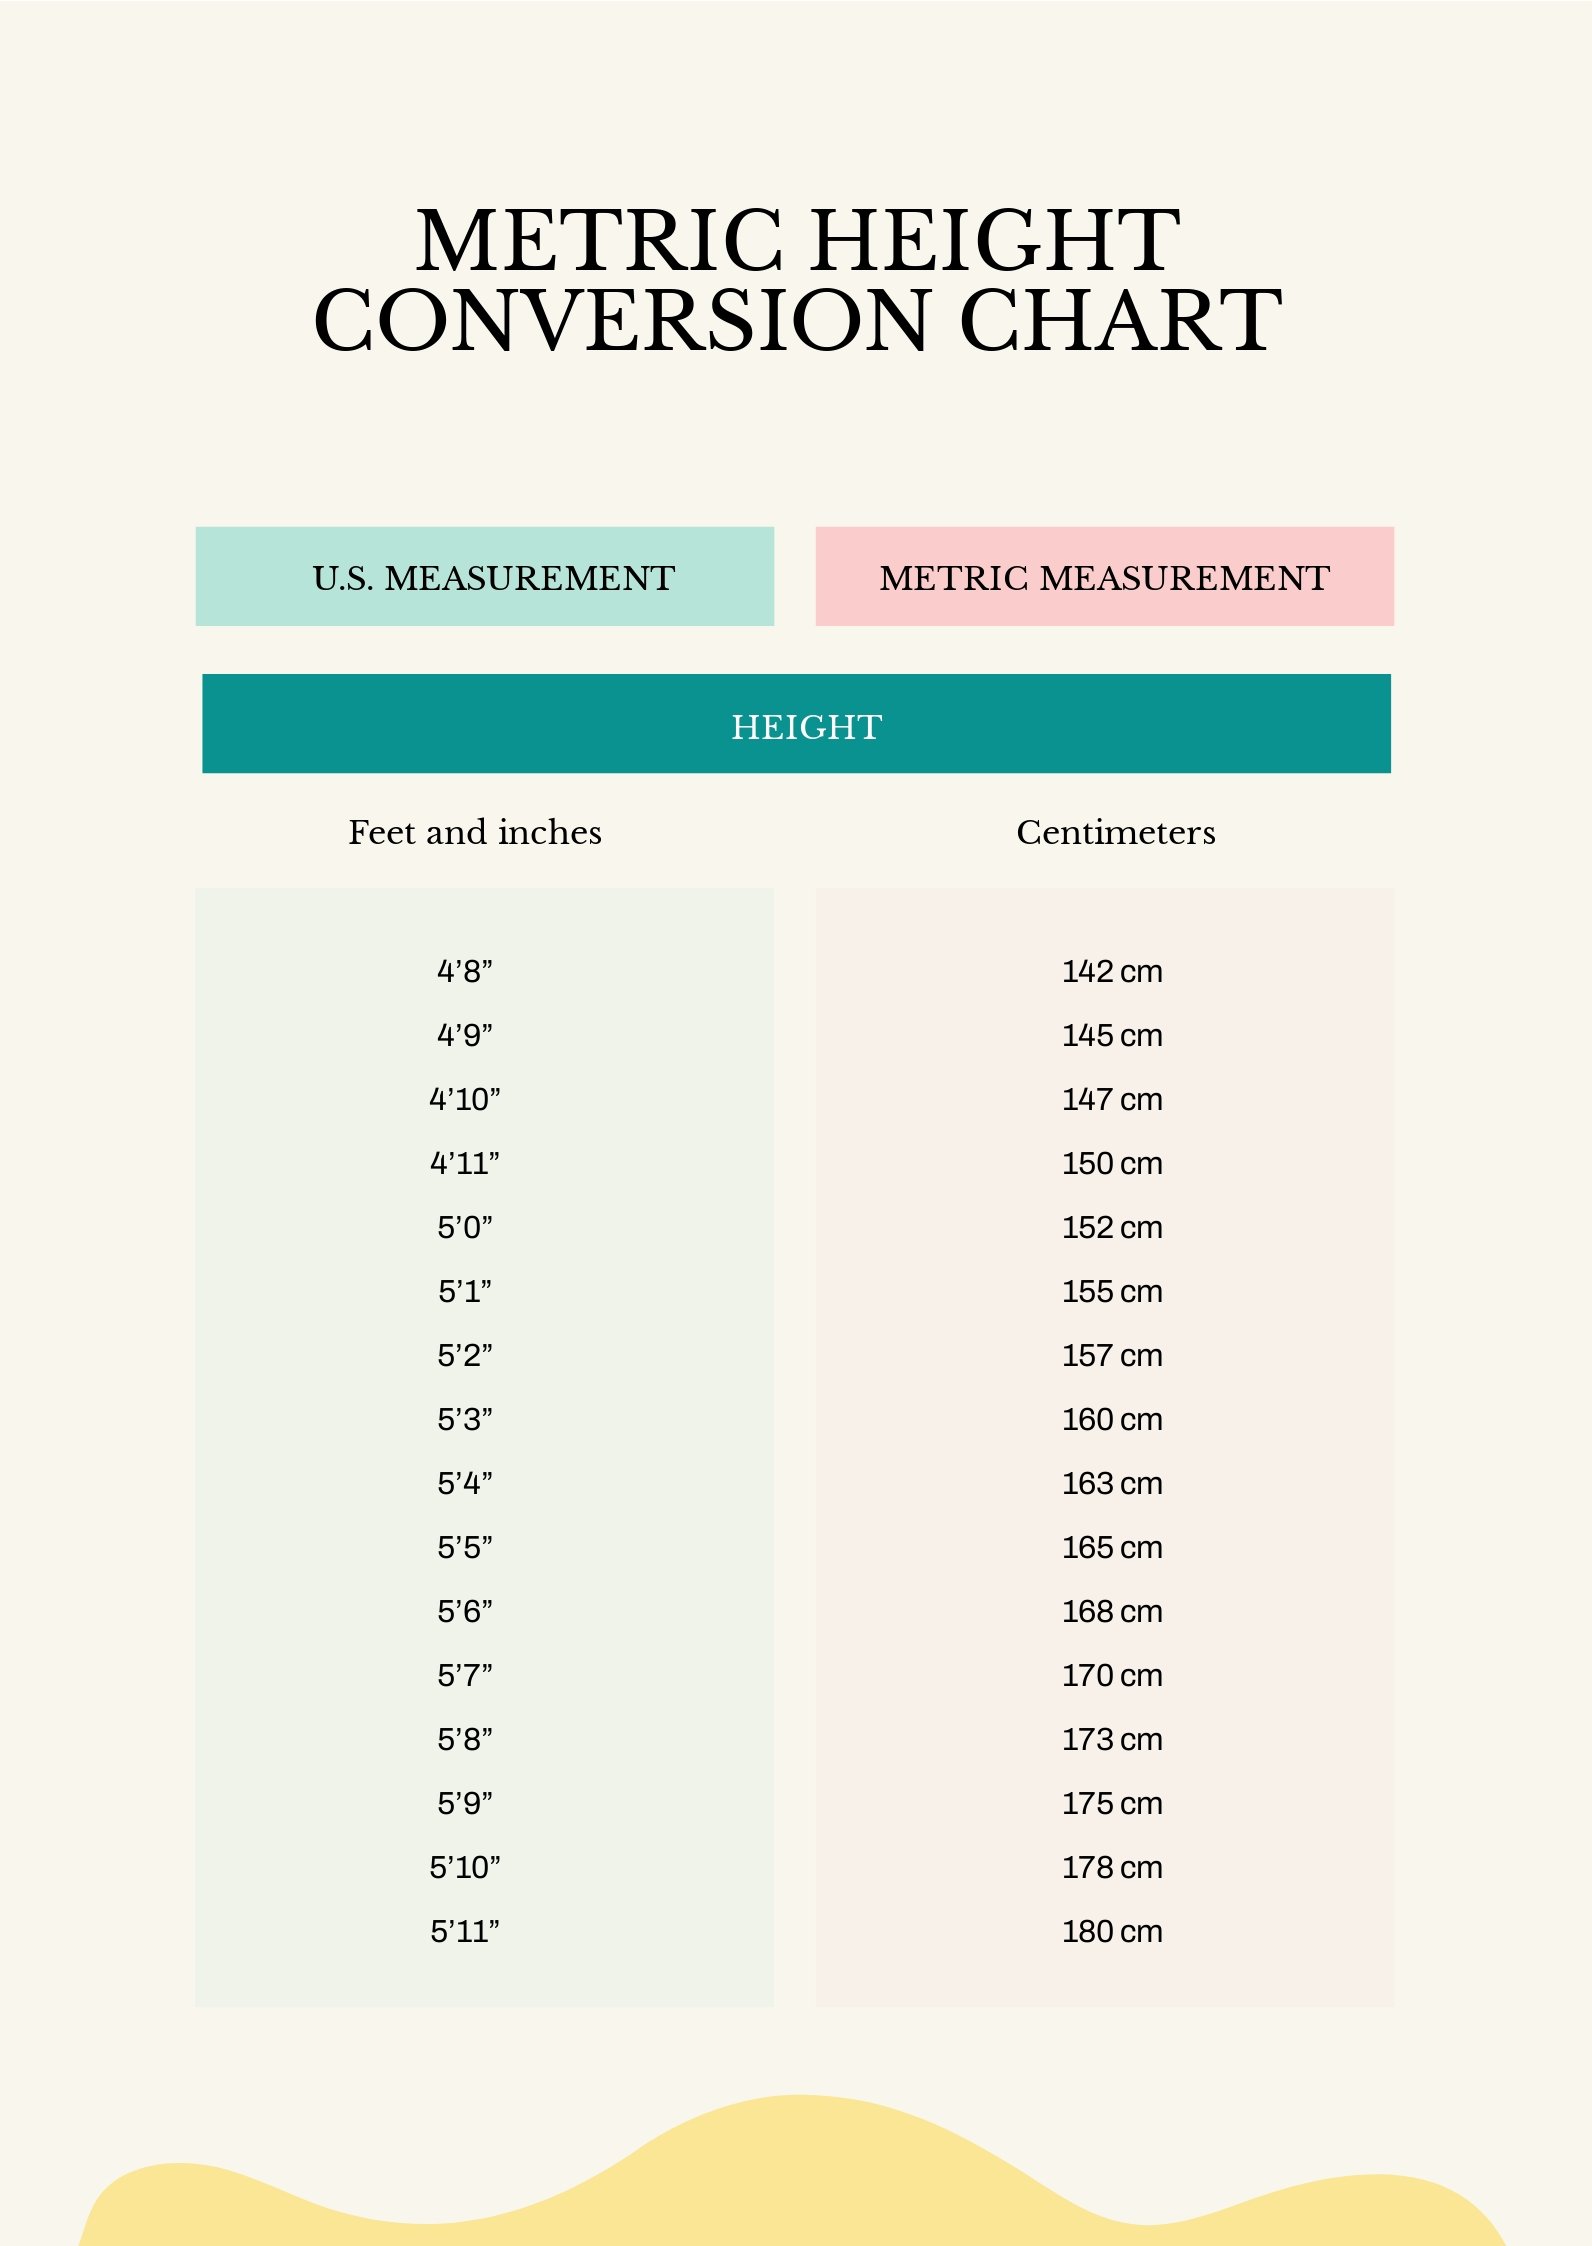 free-height-conversion-chart-template-download-in-pdf-illustrator